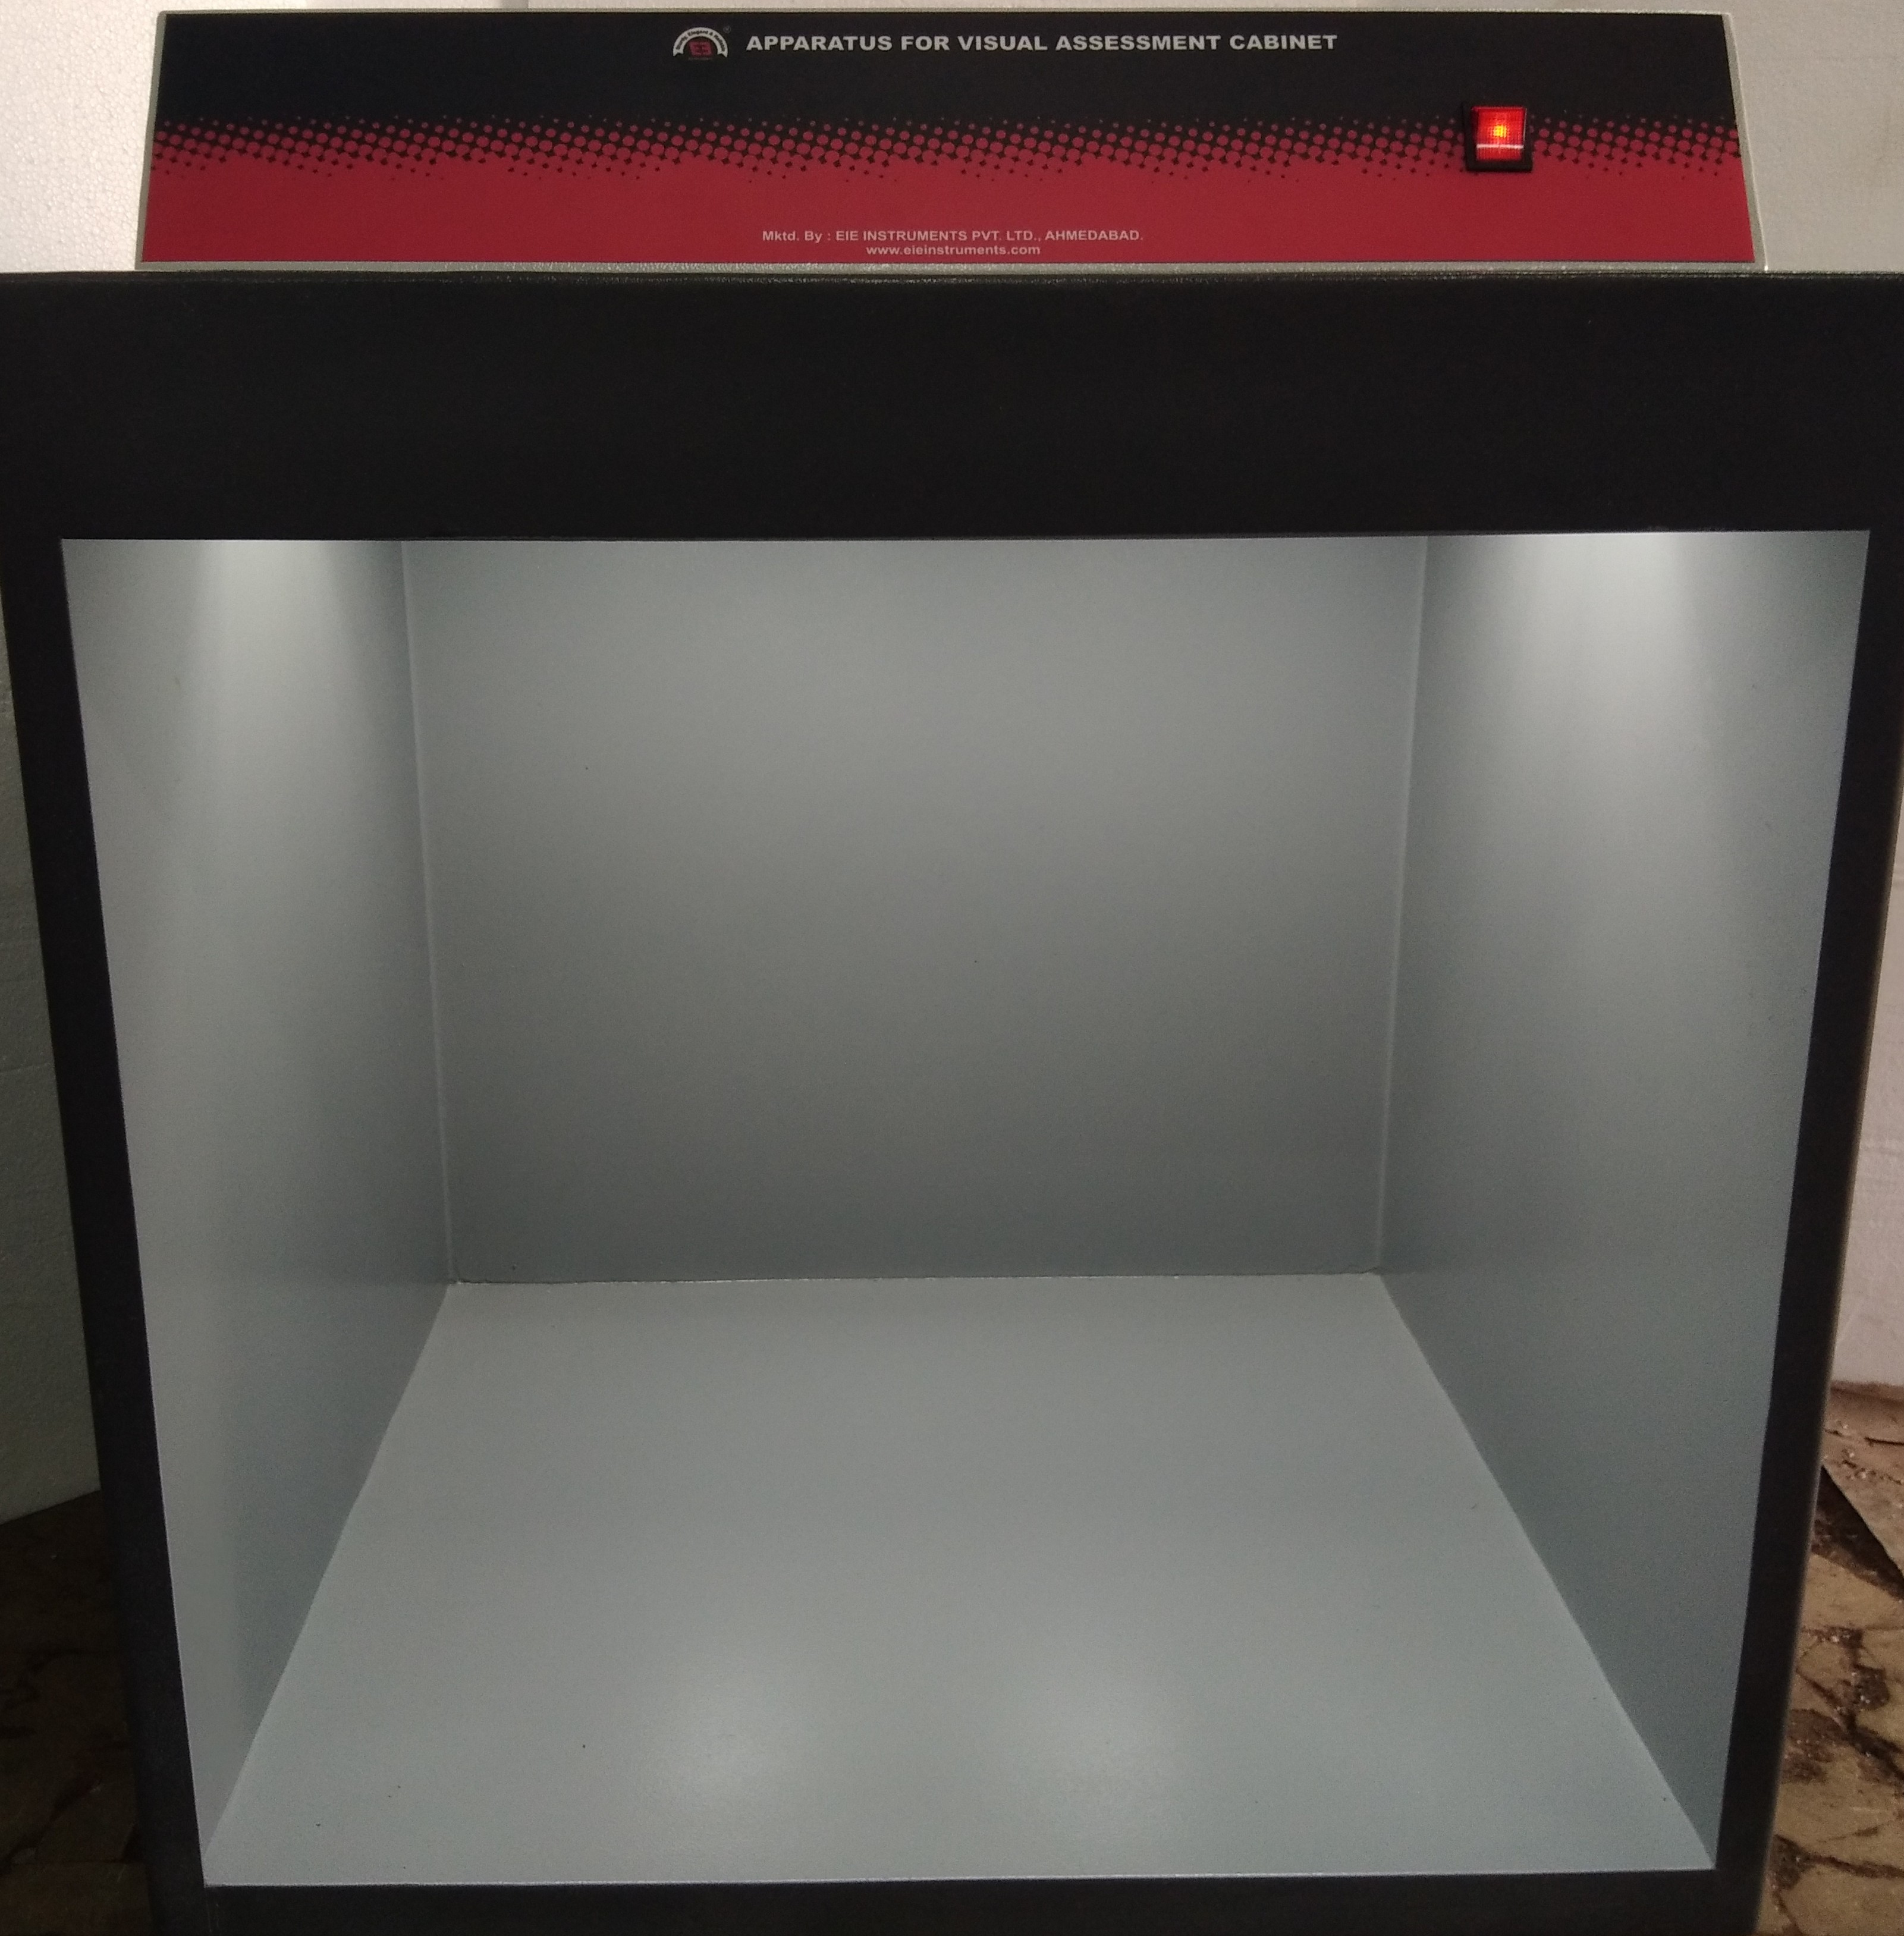 VISUAL ASSESSMENT CABINET-VIEWING CABINET-BIS 13630 (PART XI), ISO 10545-7